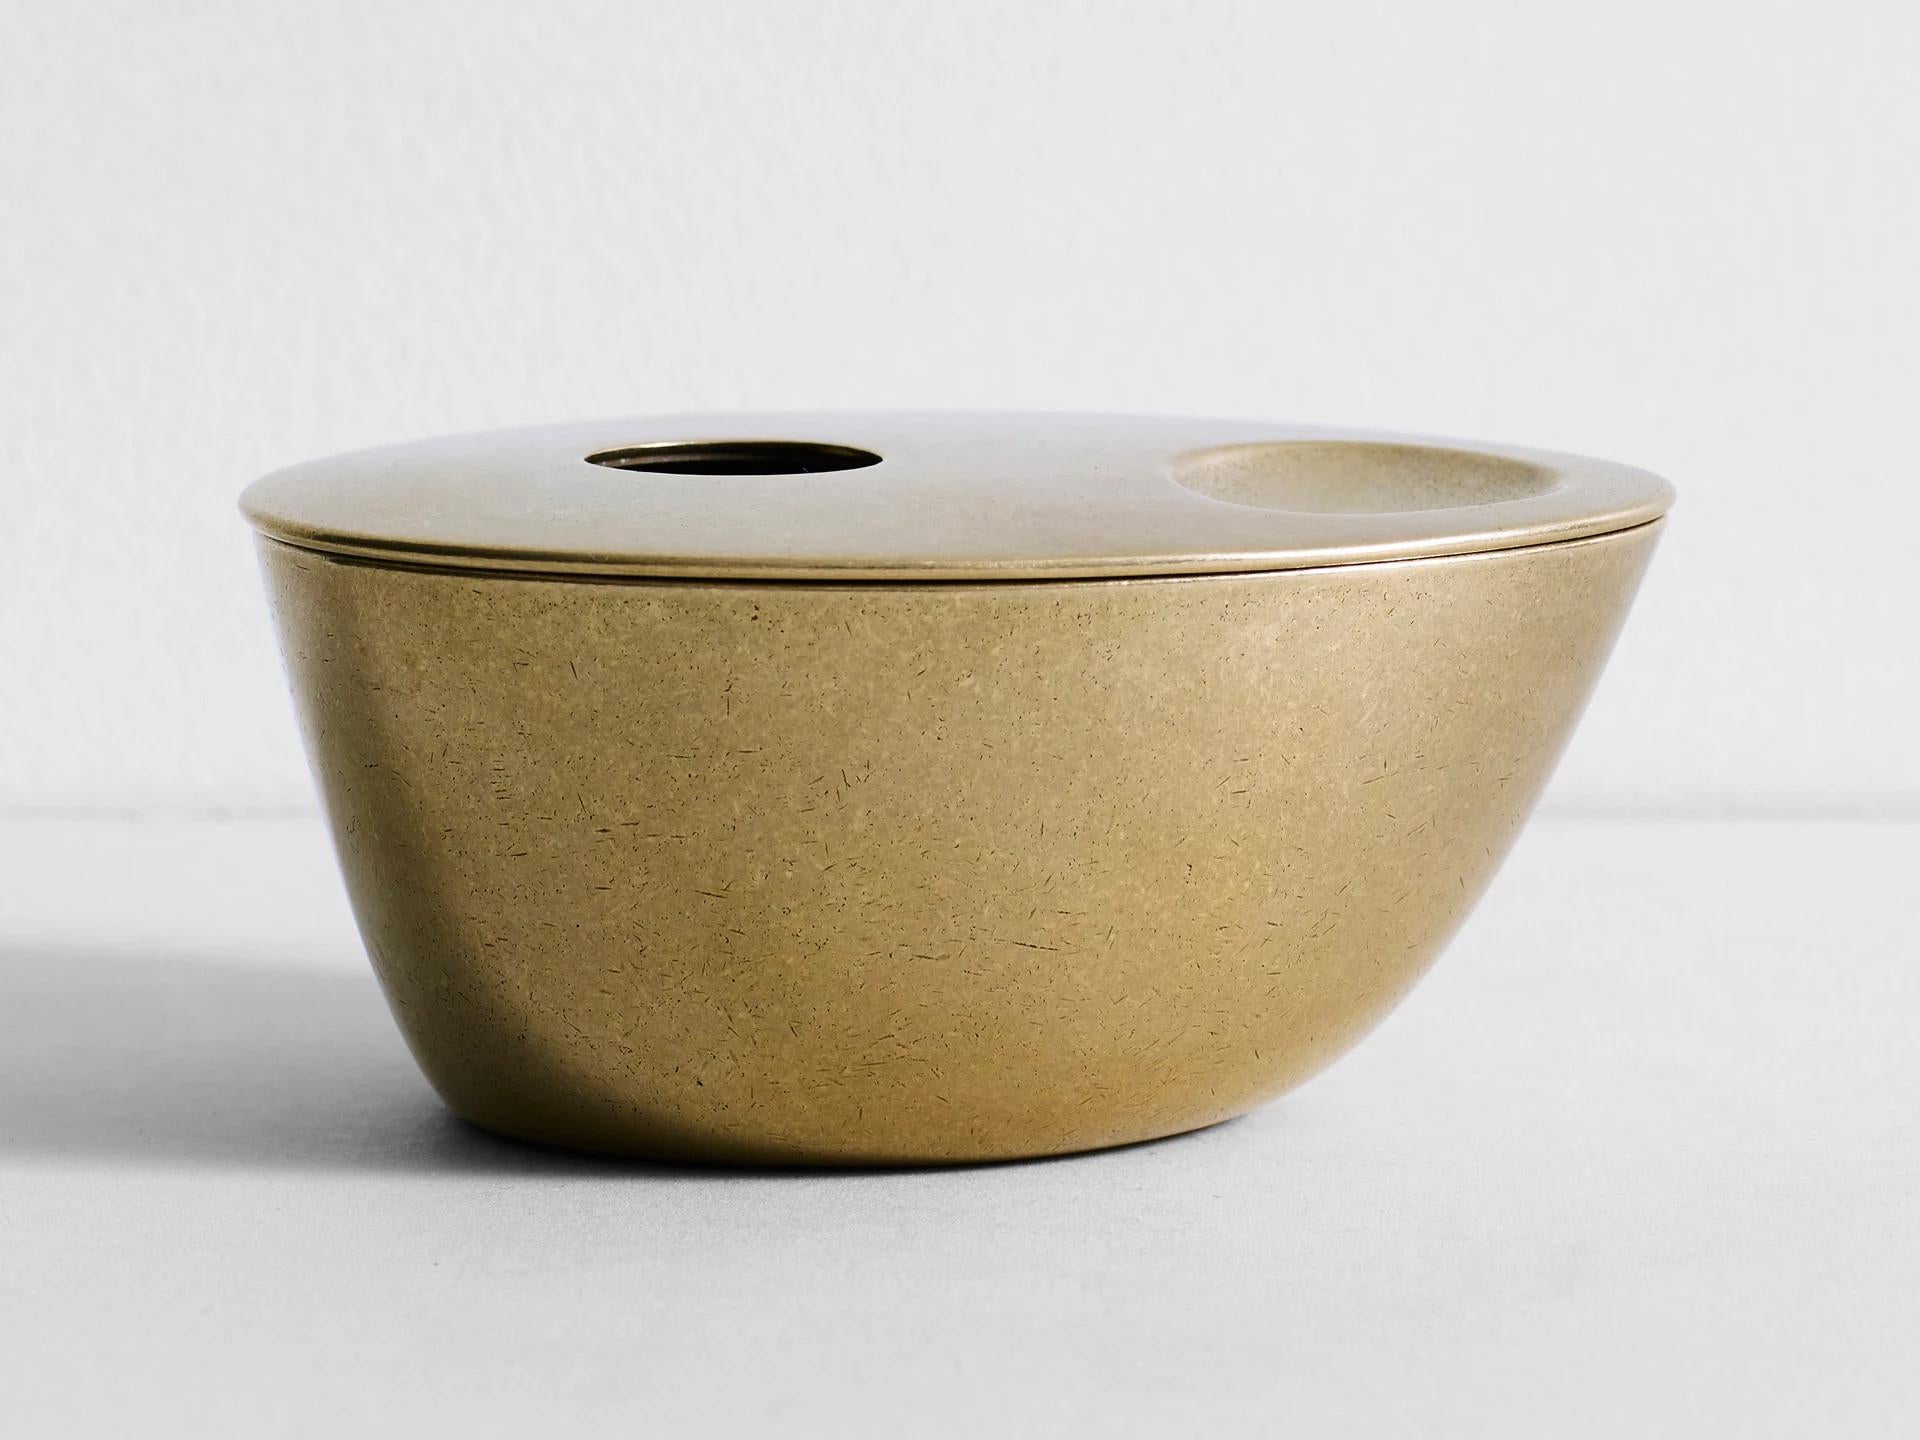 Solid brass oil burner by Henry Wilson

An object of substance and beauty, a unique, refined alternative to traditional burners. Designed for Aesop by Studio Henry Wilson and crafted from solid brass.

Dispense five to ten drops of your favoured